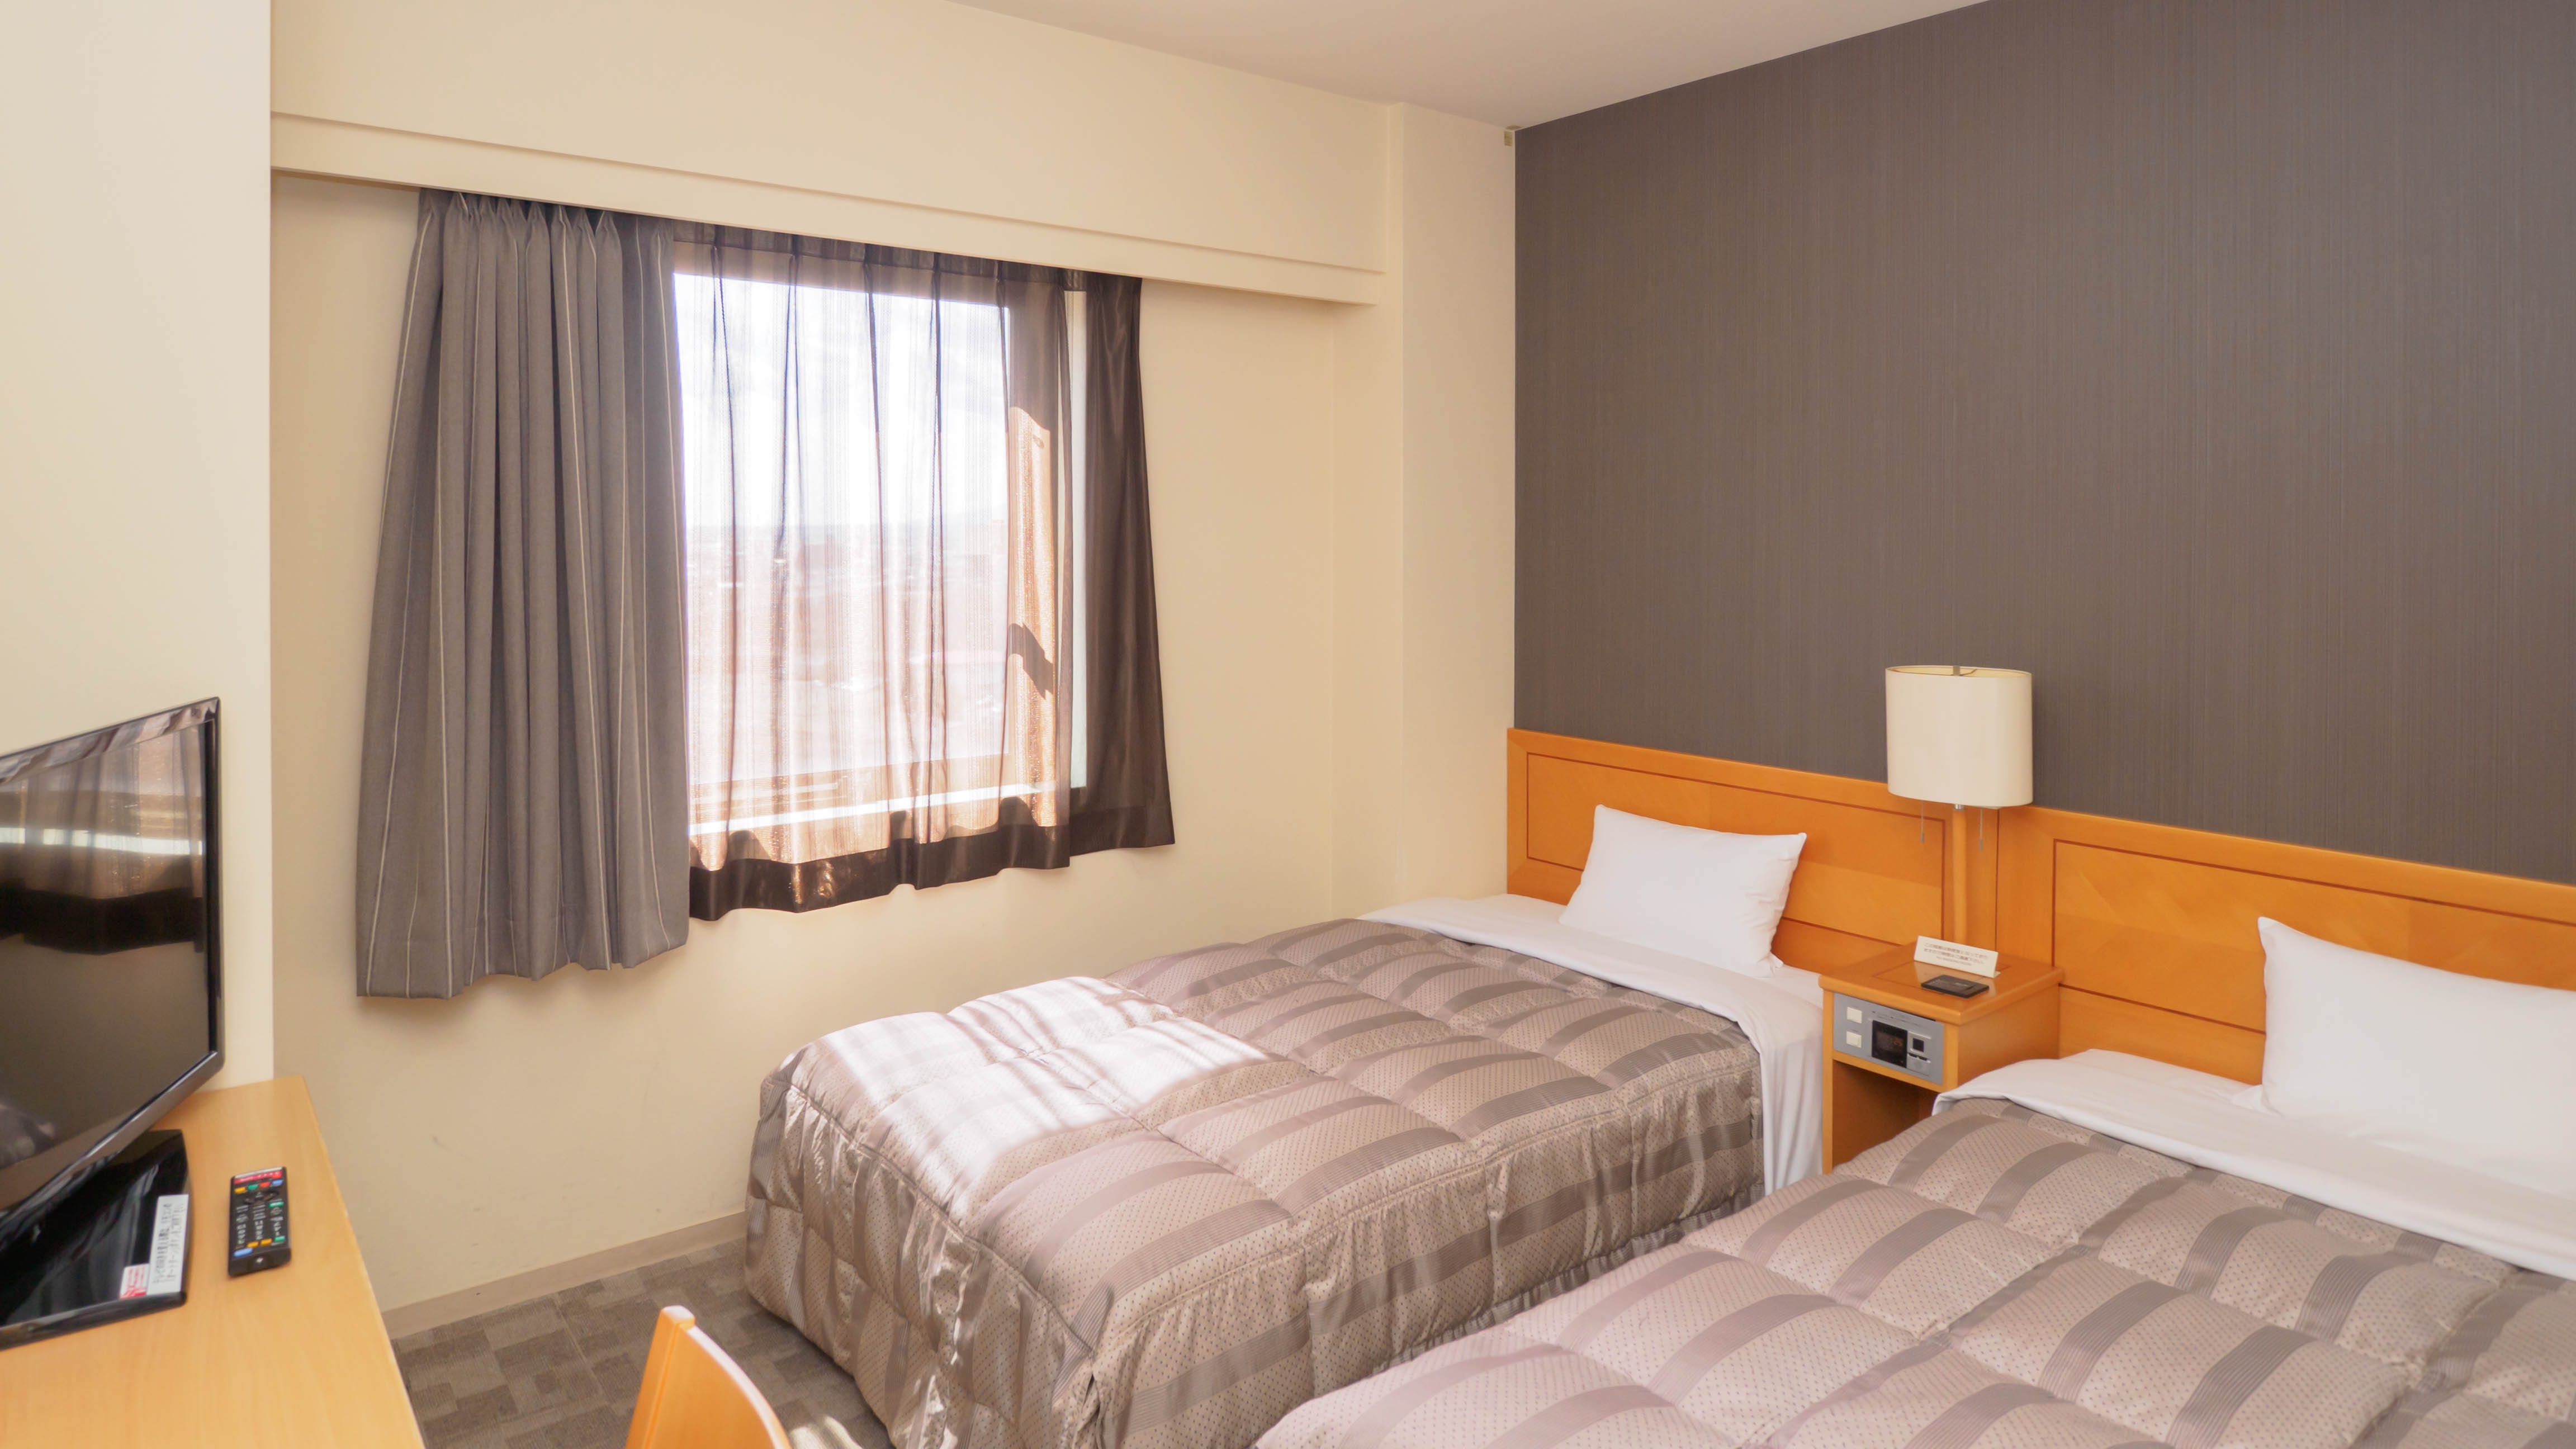 Twin room: A room with a generous size, ideal for families and couples.